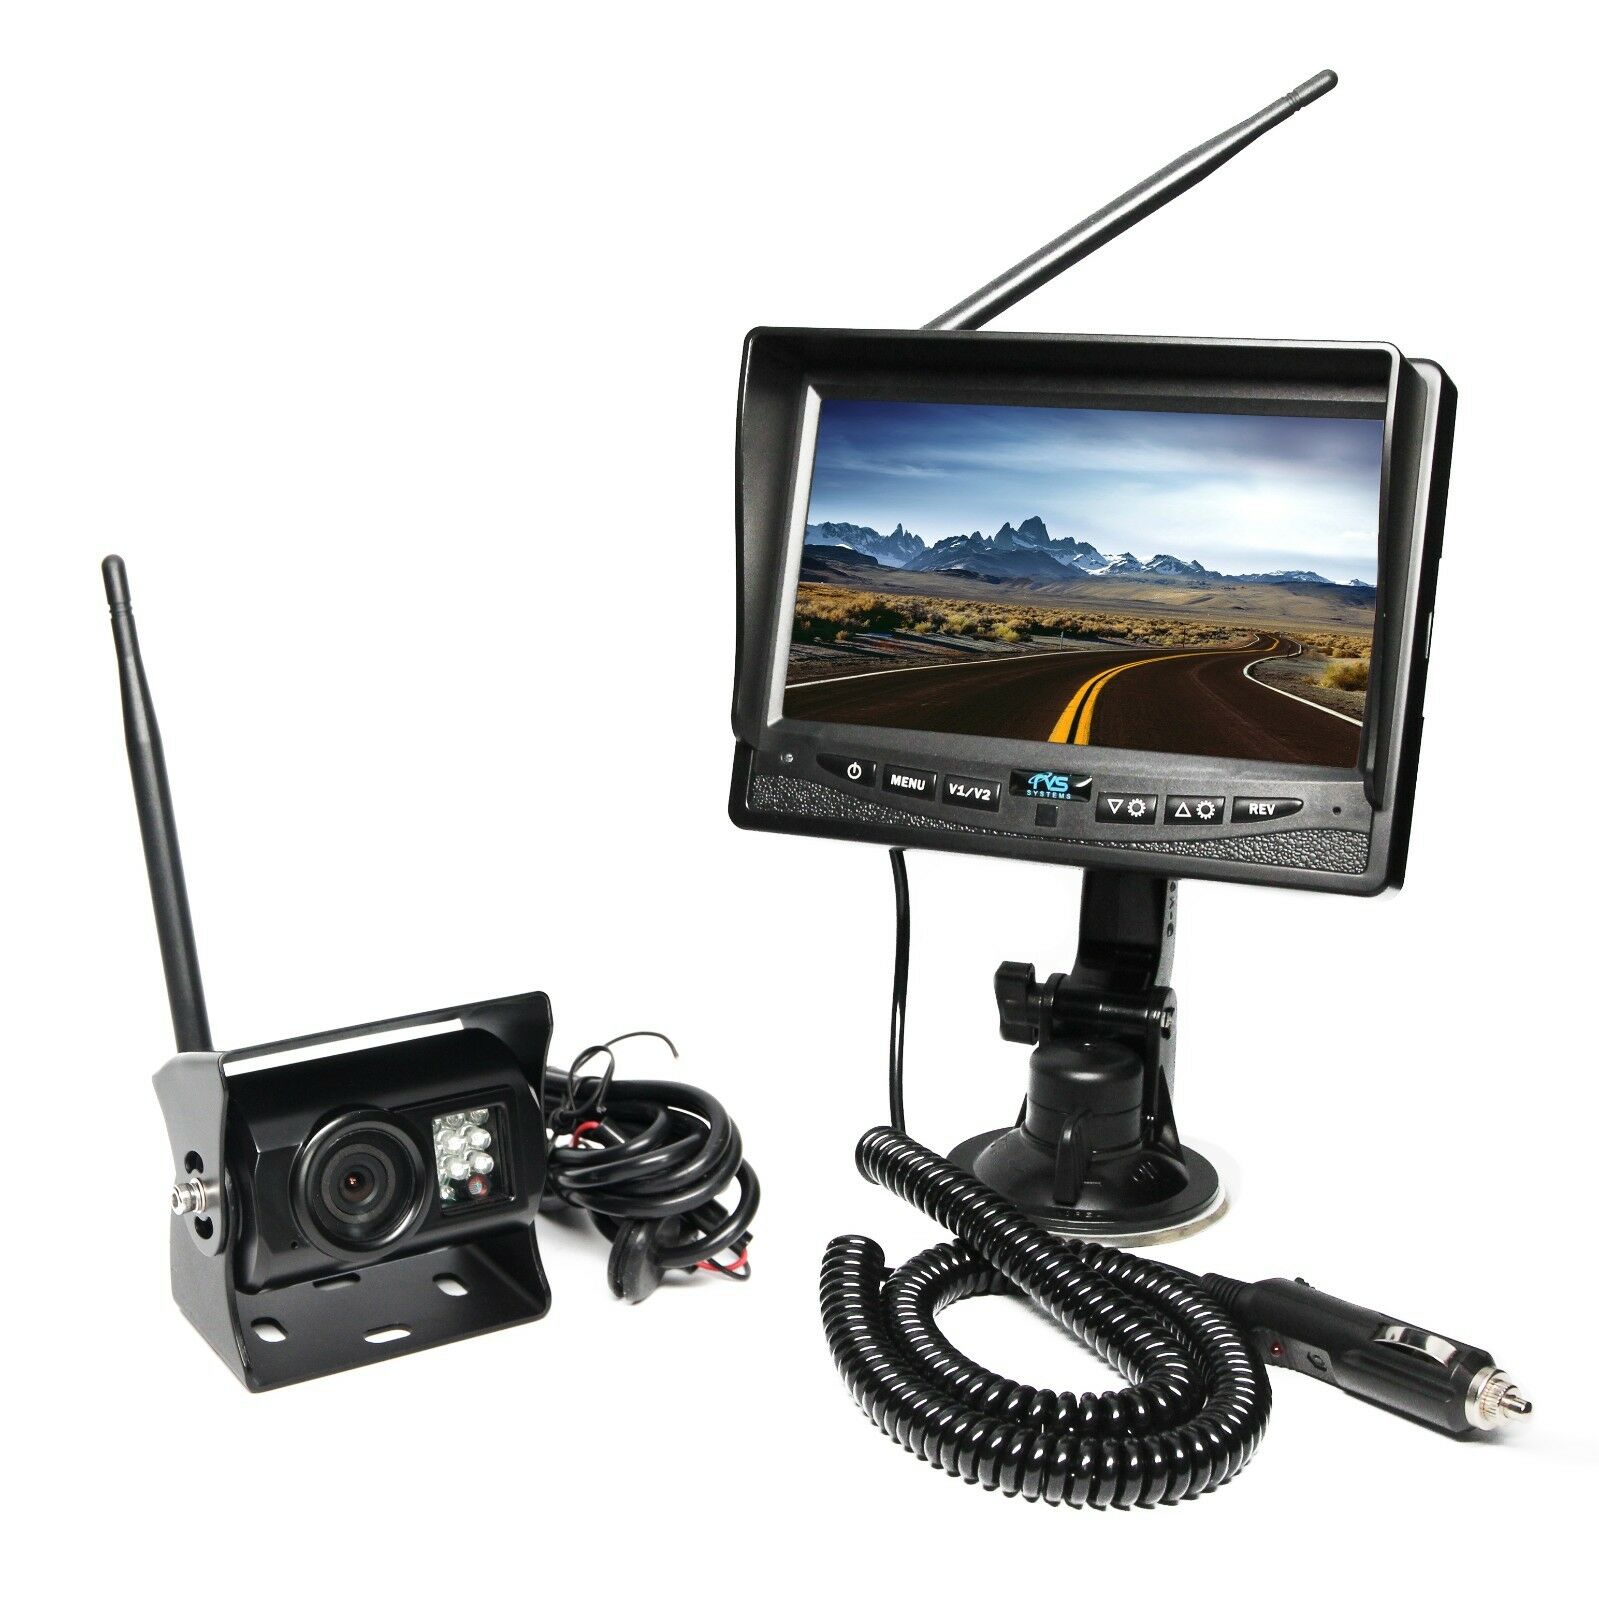 Wireless 7" LCD Split Screen Backup Camera with Cigarette Lighter Plug 130° View